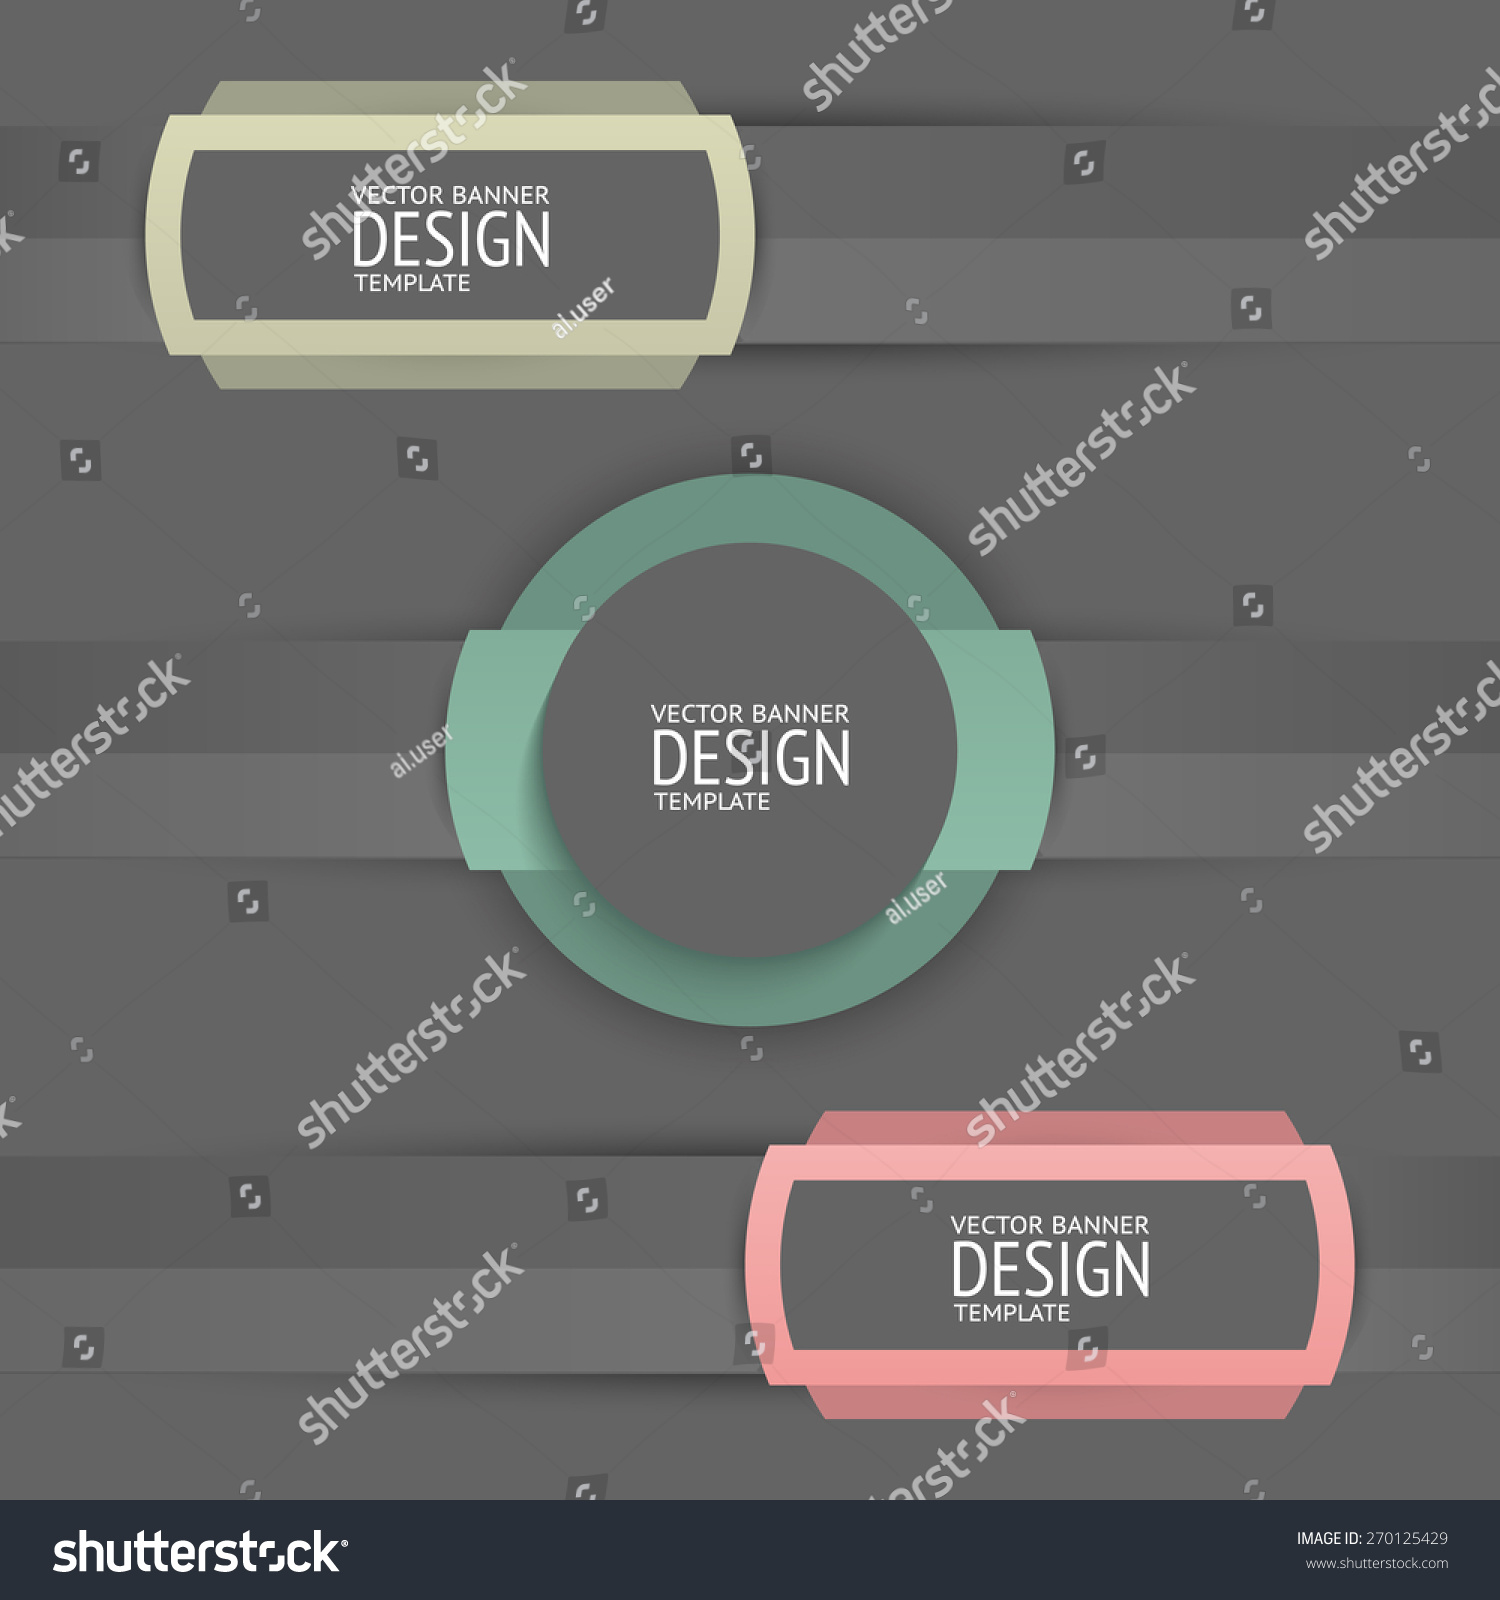 Vector Set Of High Quality Banners. - 270125429 : Shutterstock